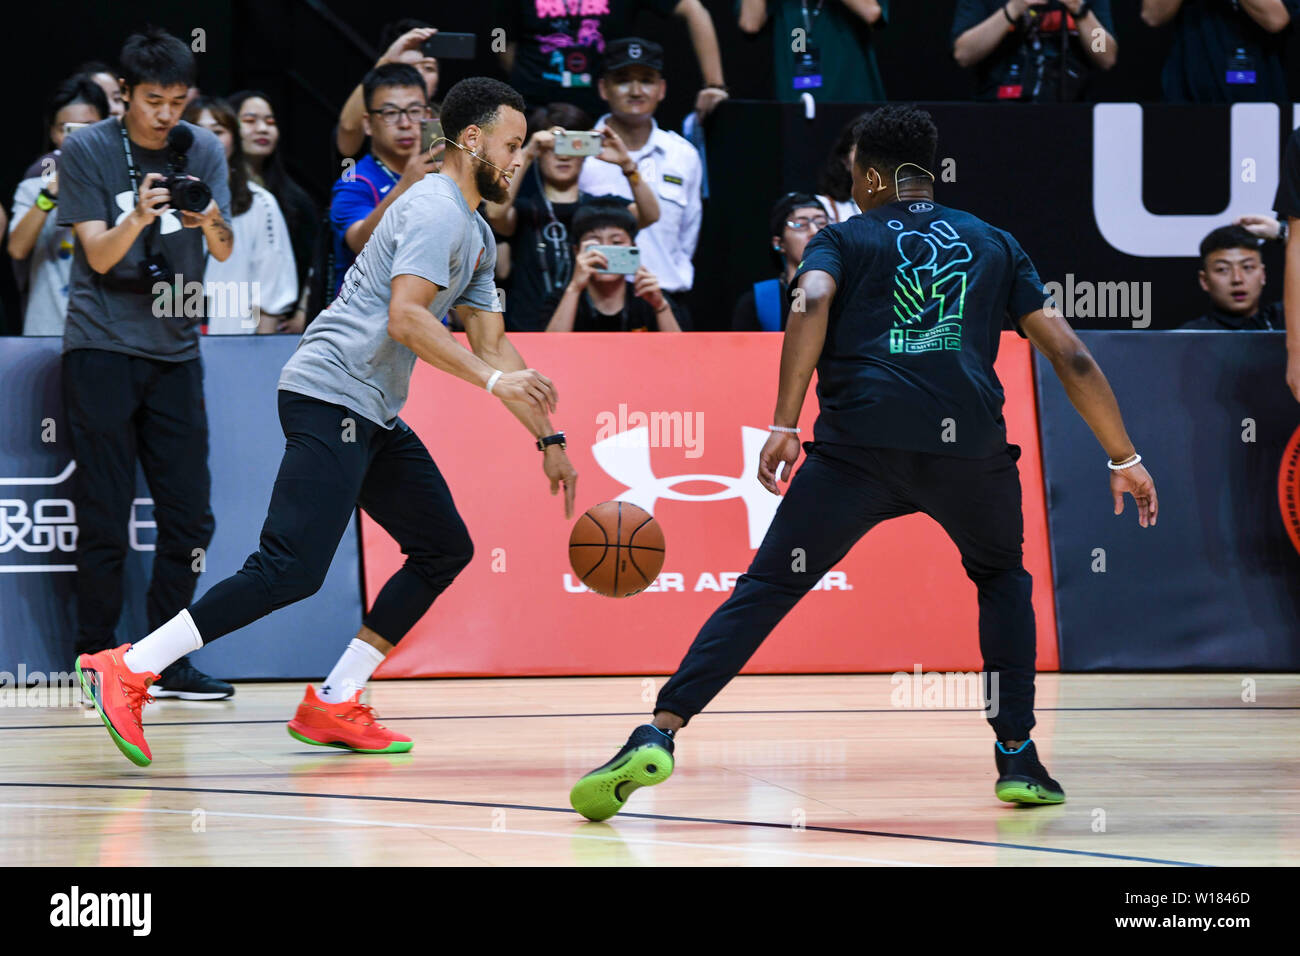 NBA stars Stephen Curry, left, of Golden State Warriors, and Dennis Smith  Jr. of New York Knicks, attend the 2019 Under Armour Basketball Asia Tour  in Shanghai, China, 29 June 2019 Stock Photo - Alamy